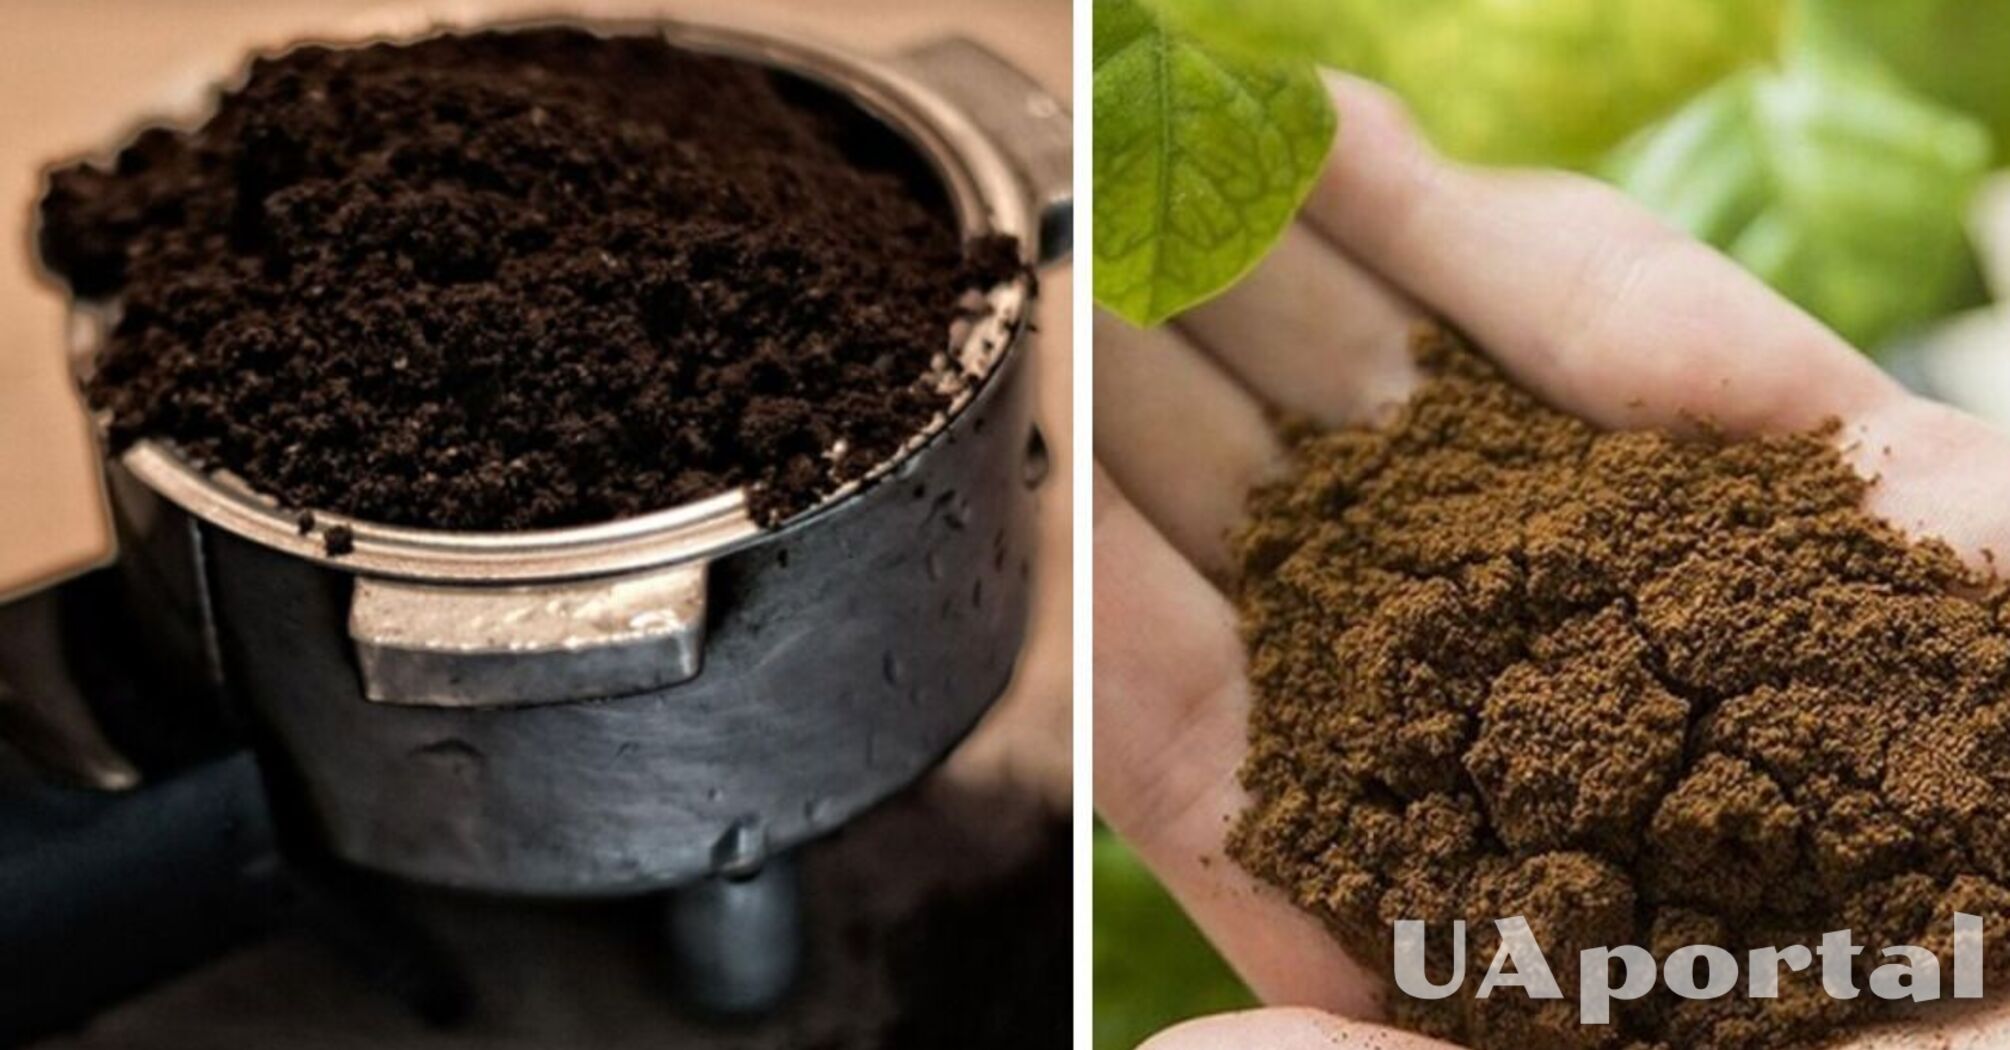 Which plants can be fertilized with coffee grounds